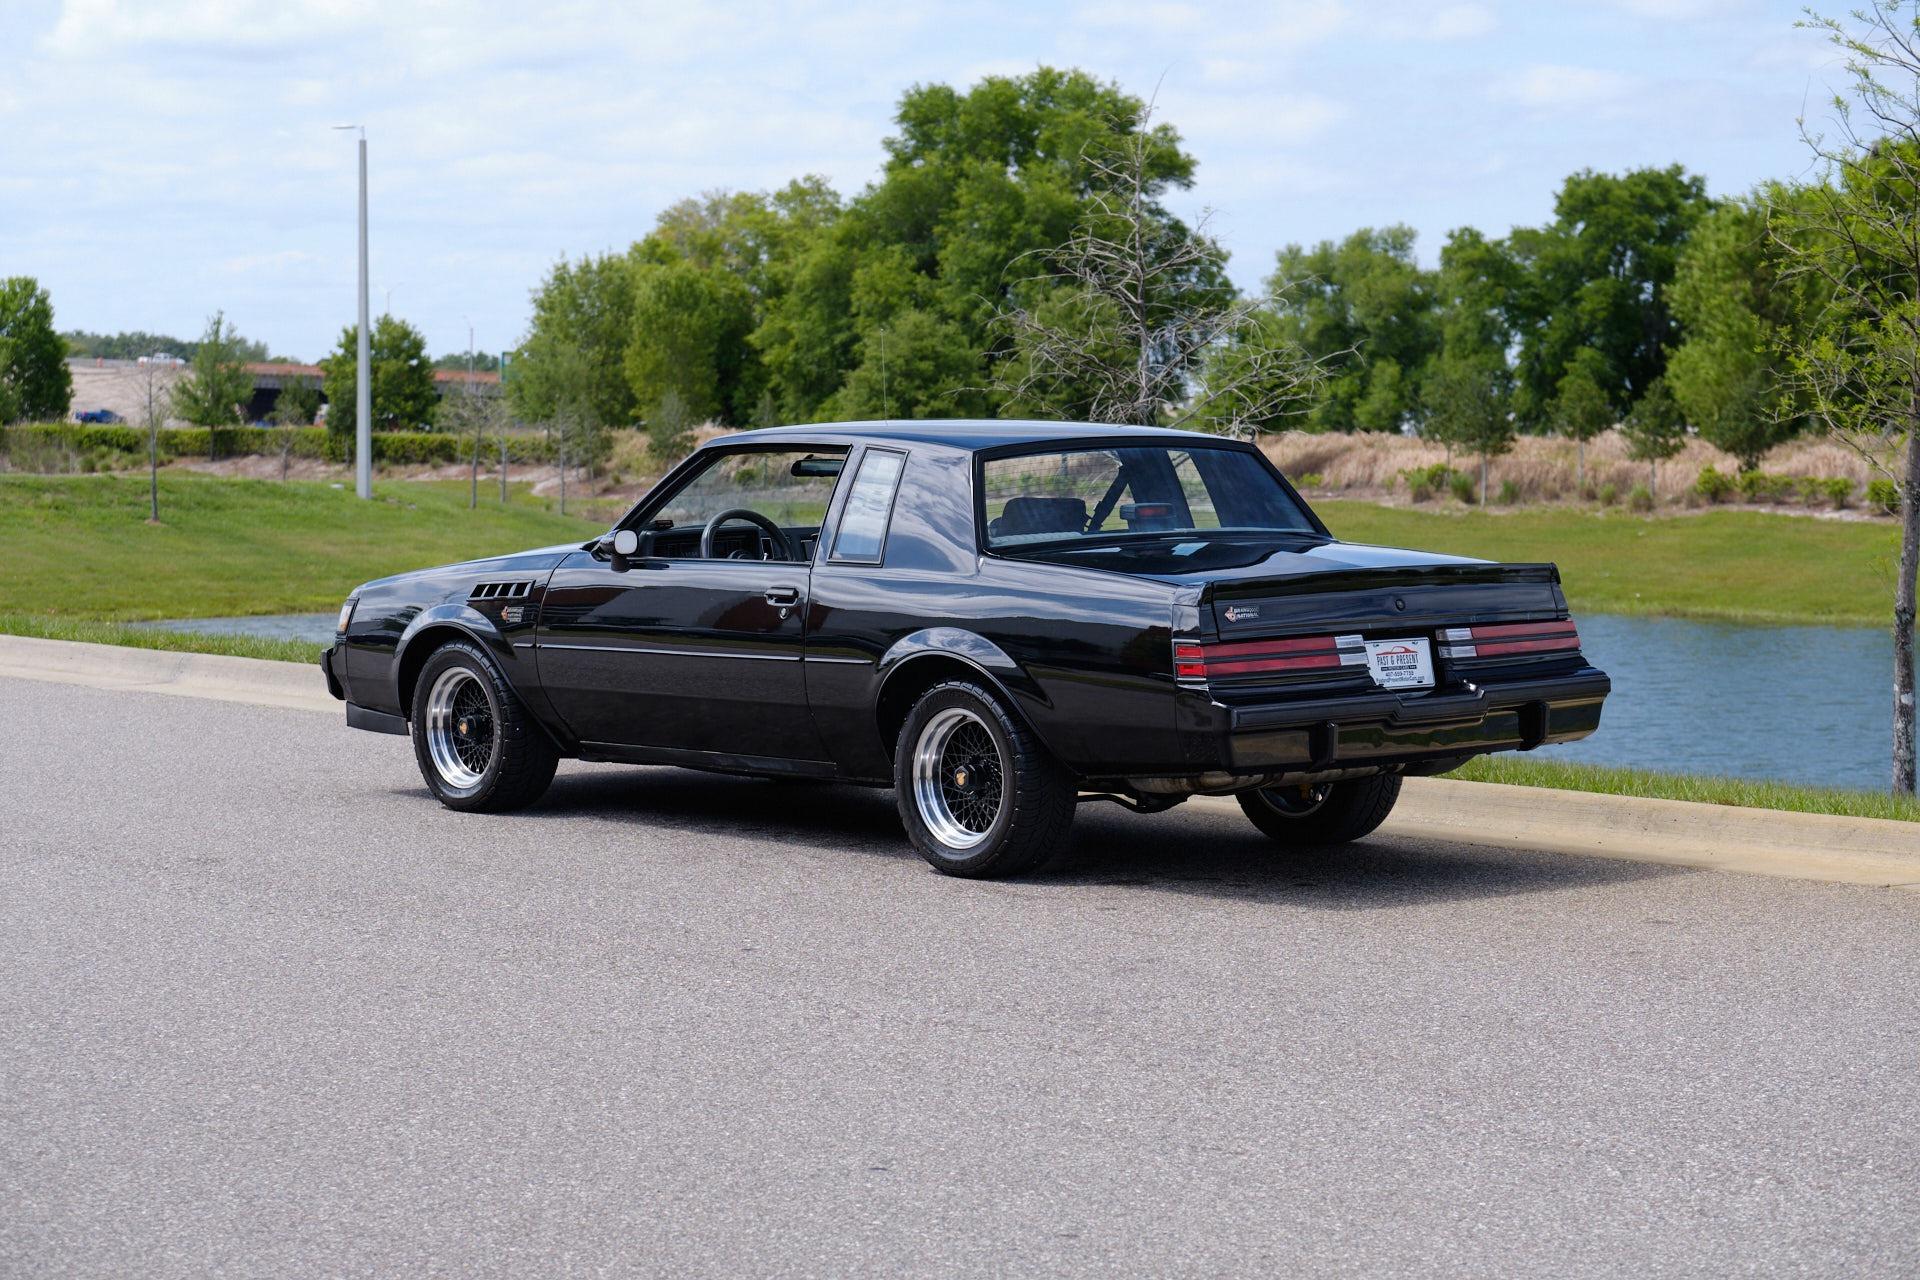 1987 Buick Grand National 3